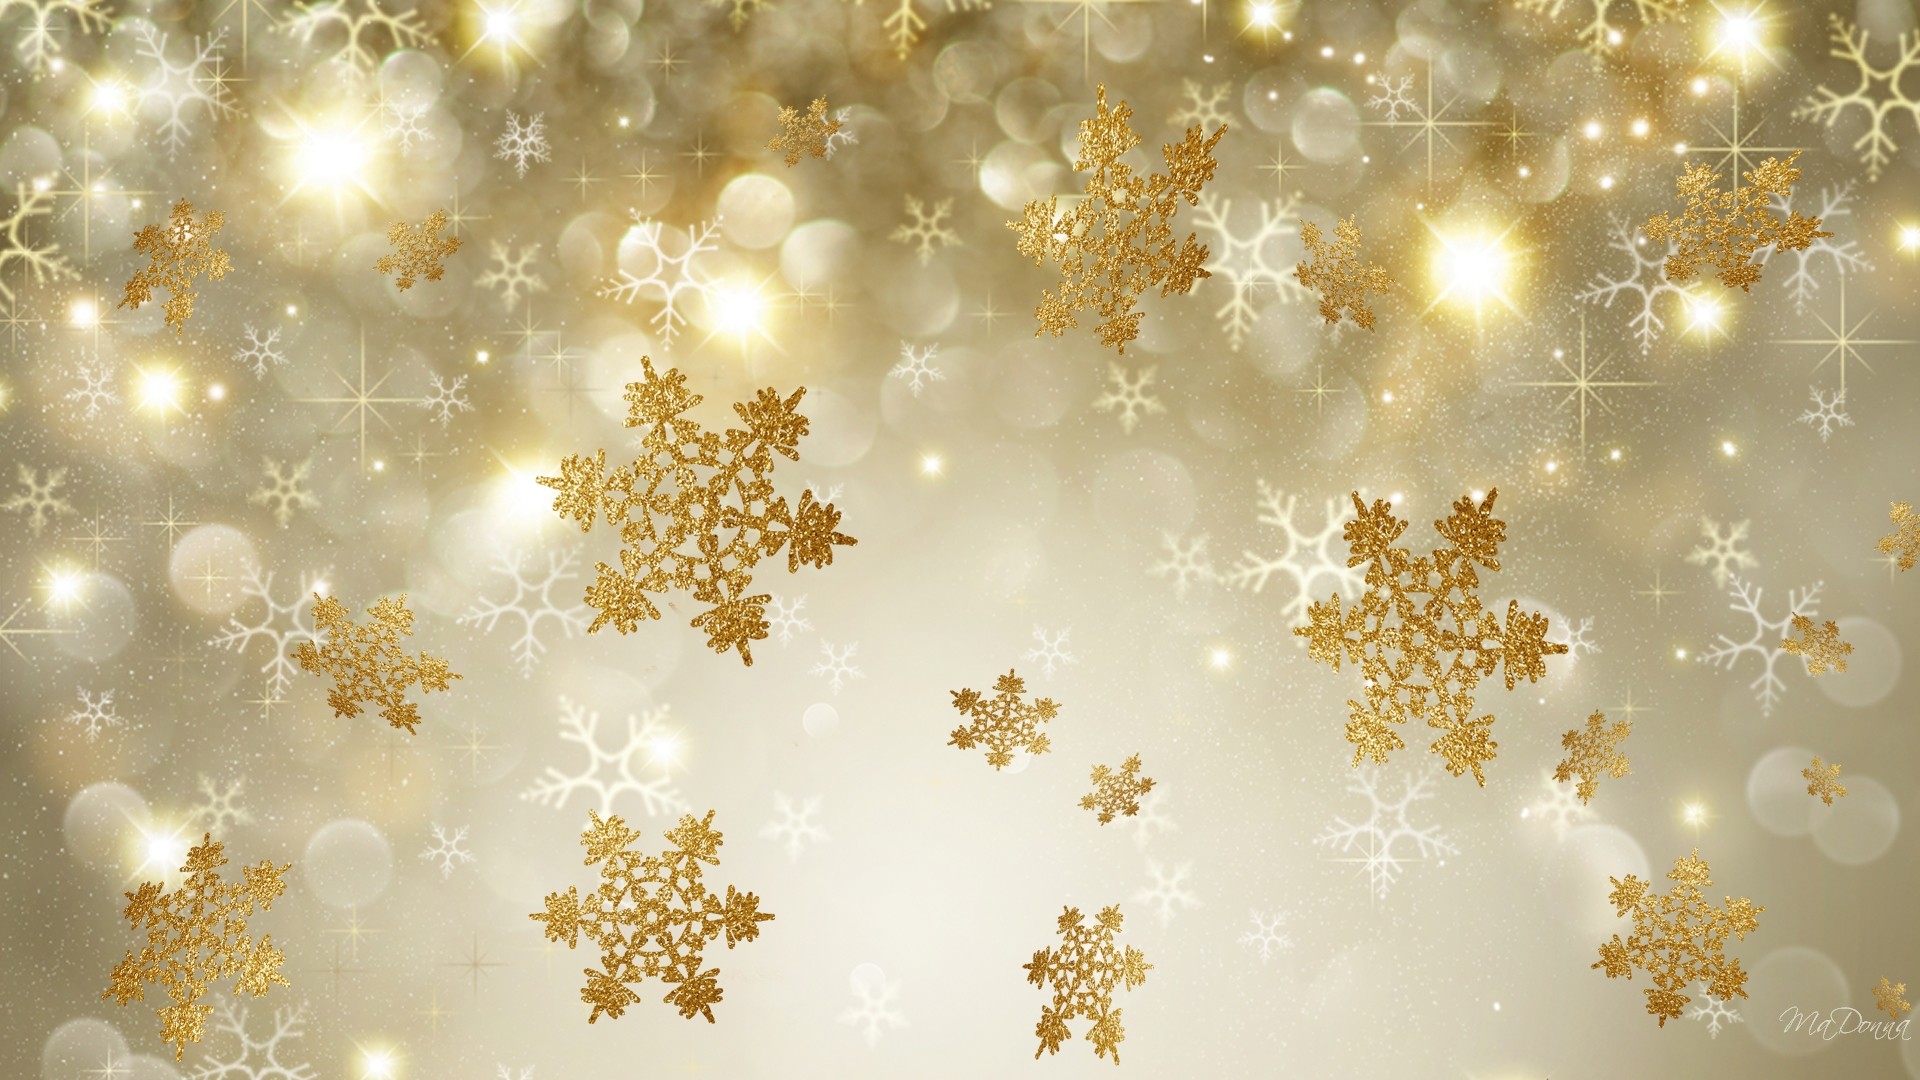 1920x1080 Golden snowflakes hd wallpaper background image id